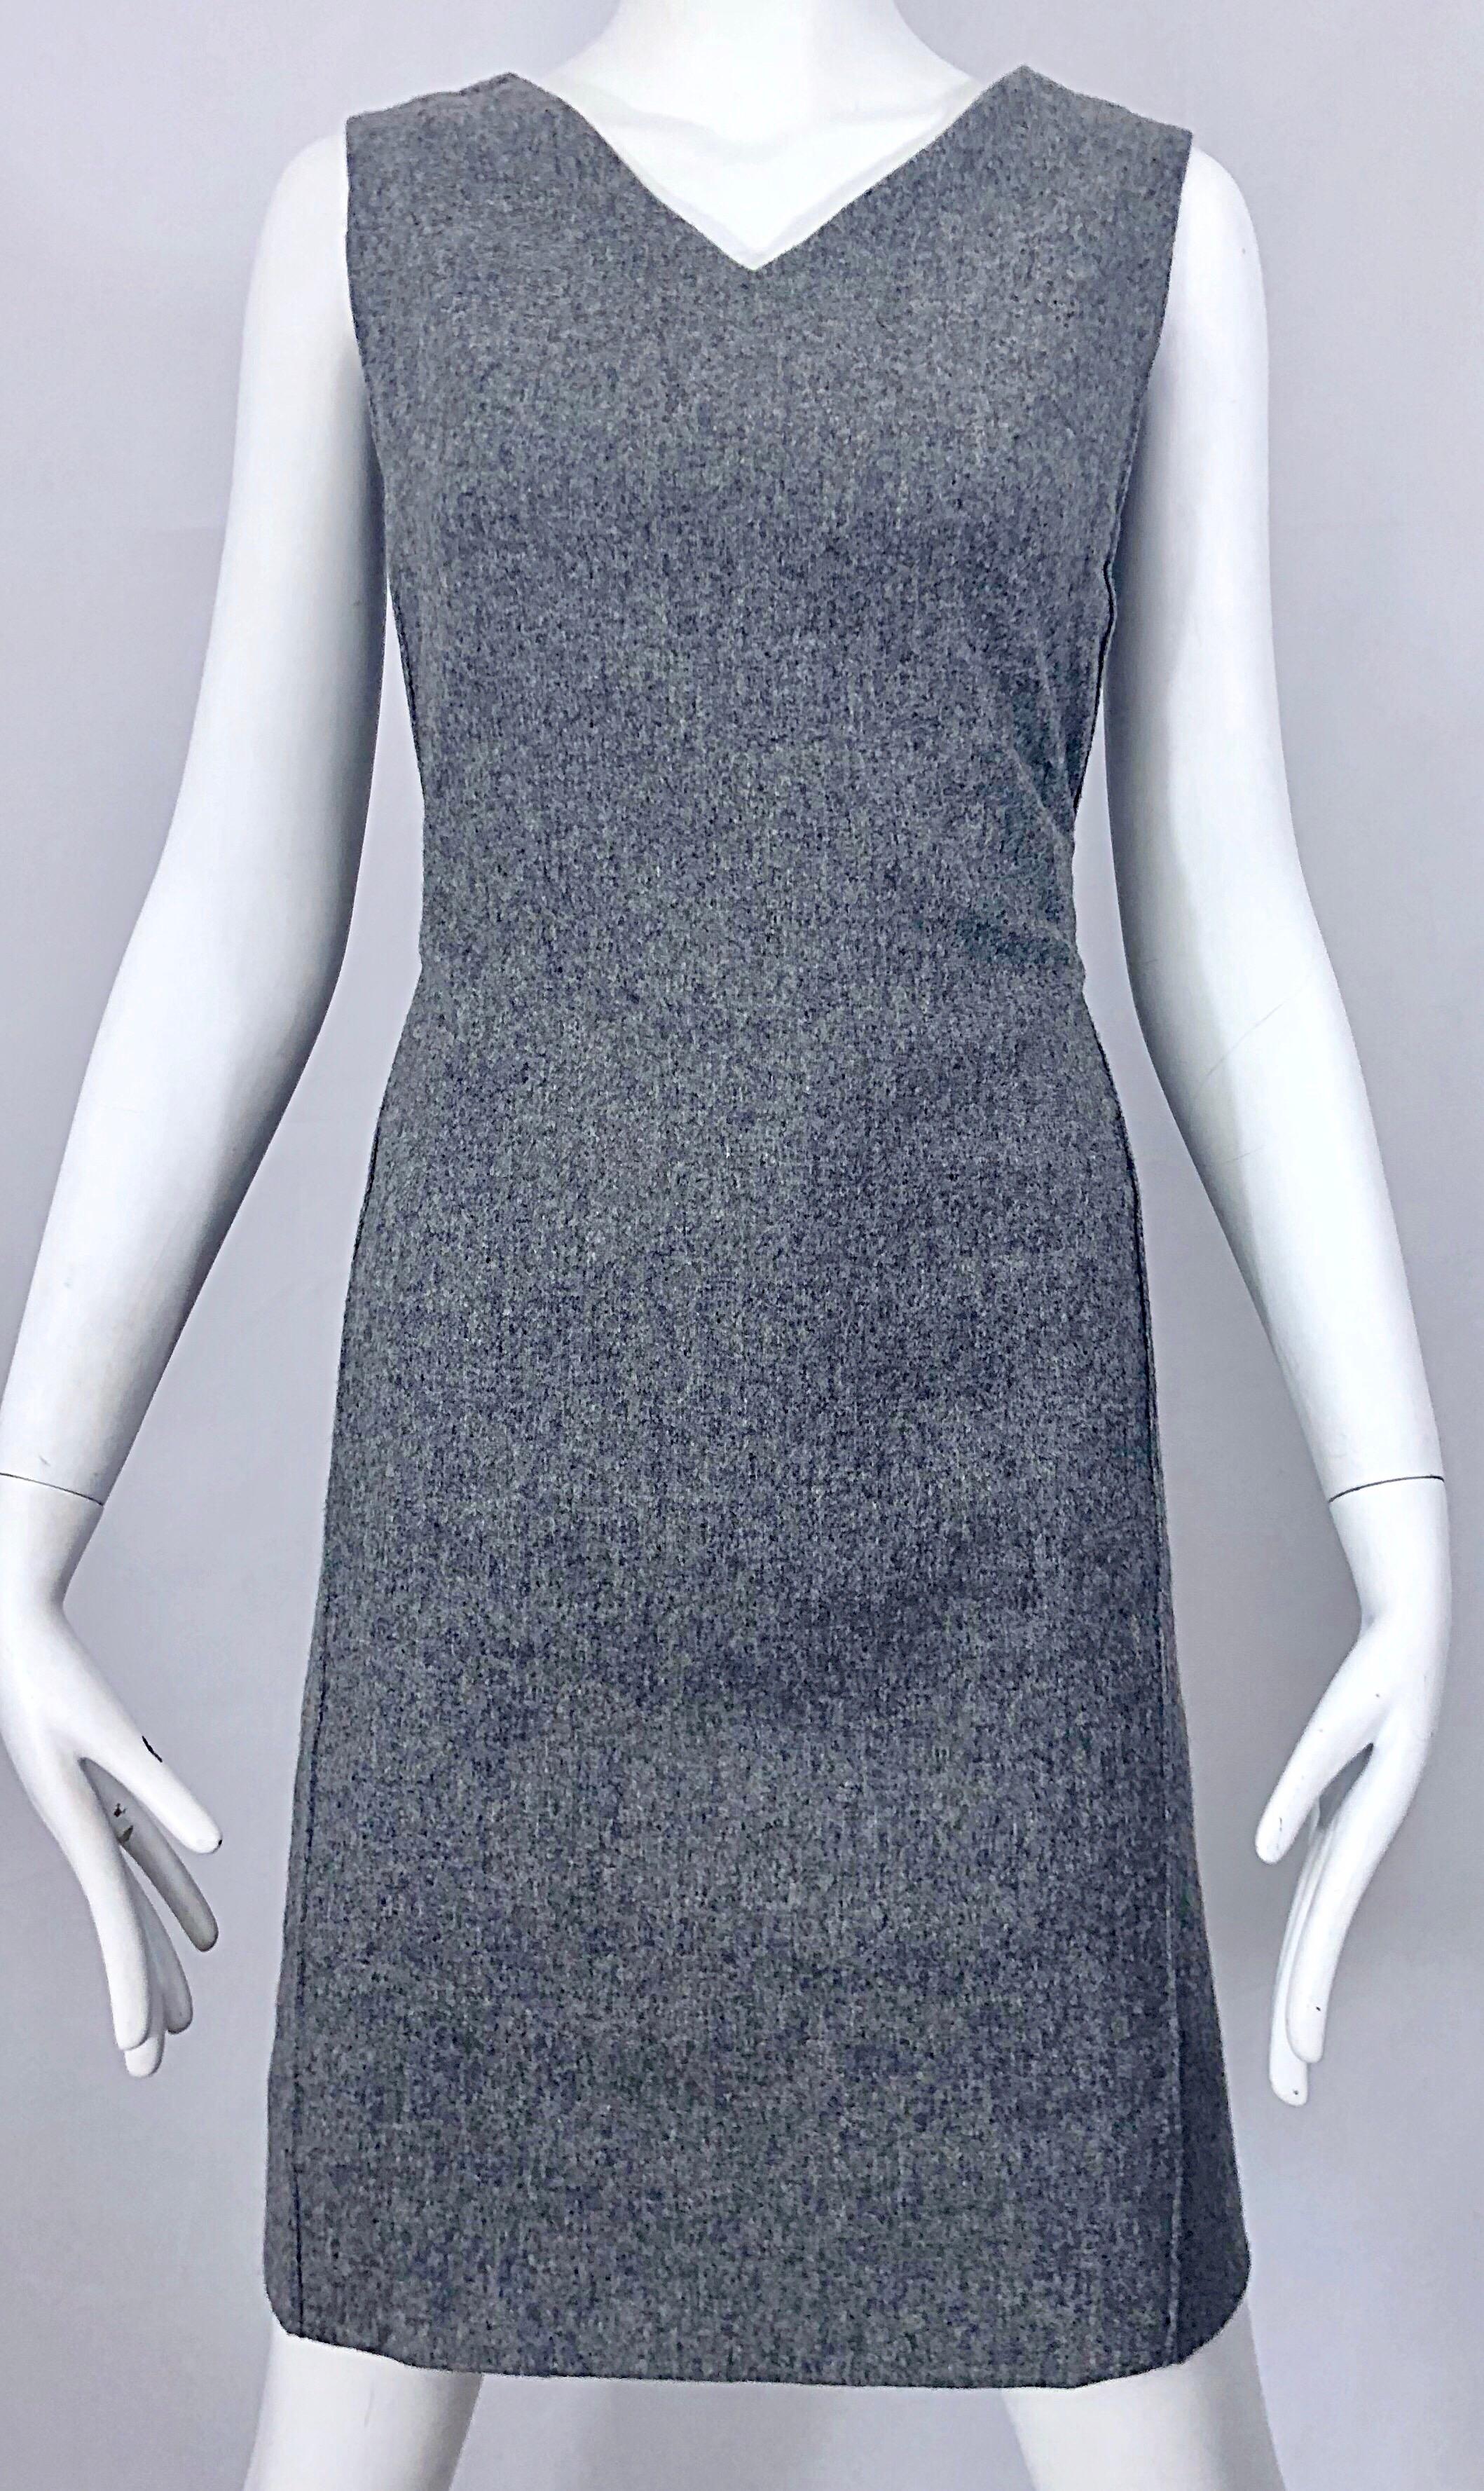 Chic 1960s Heather Gray Wool Sleeveless Vintage 60s Mod Shift Dress For Sale 1